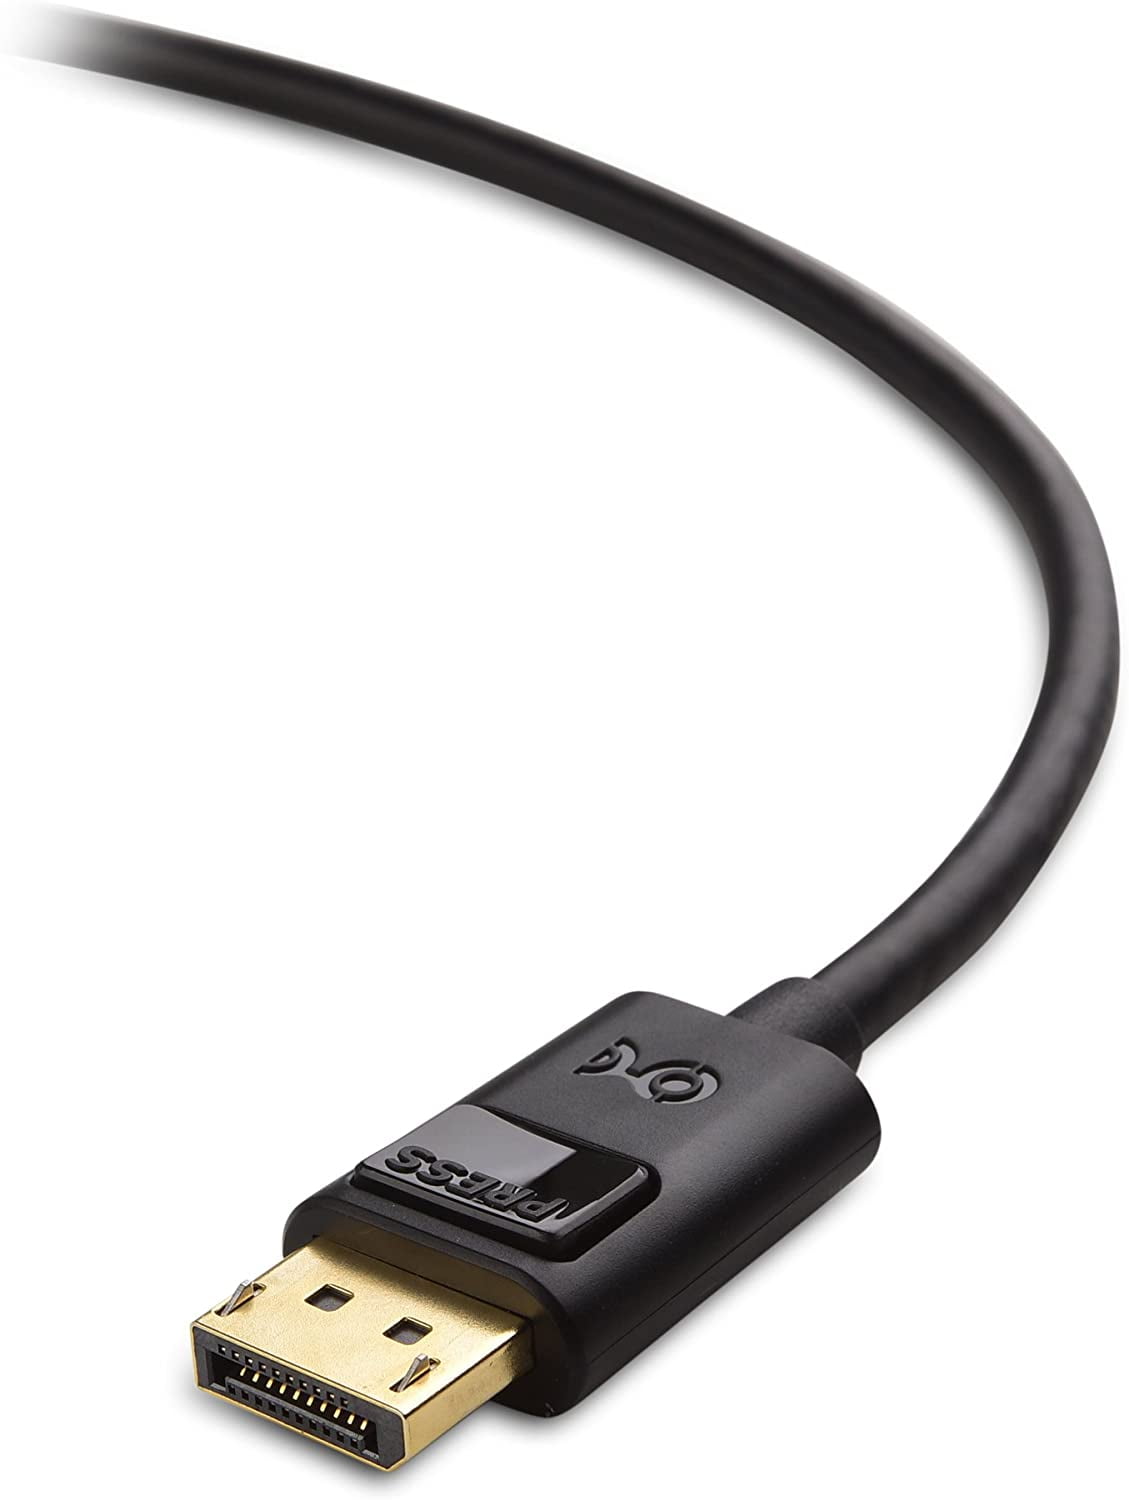 Cable Matters Unidirectional DisplayPort to HDMI Cable 35 ft, Gold-Plated  DP to HDMI Cable, Display Port to HDMI Adapter Cable, 35 Feet